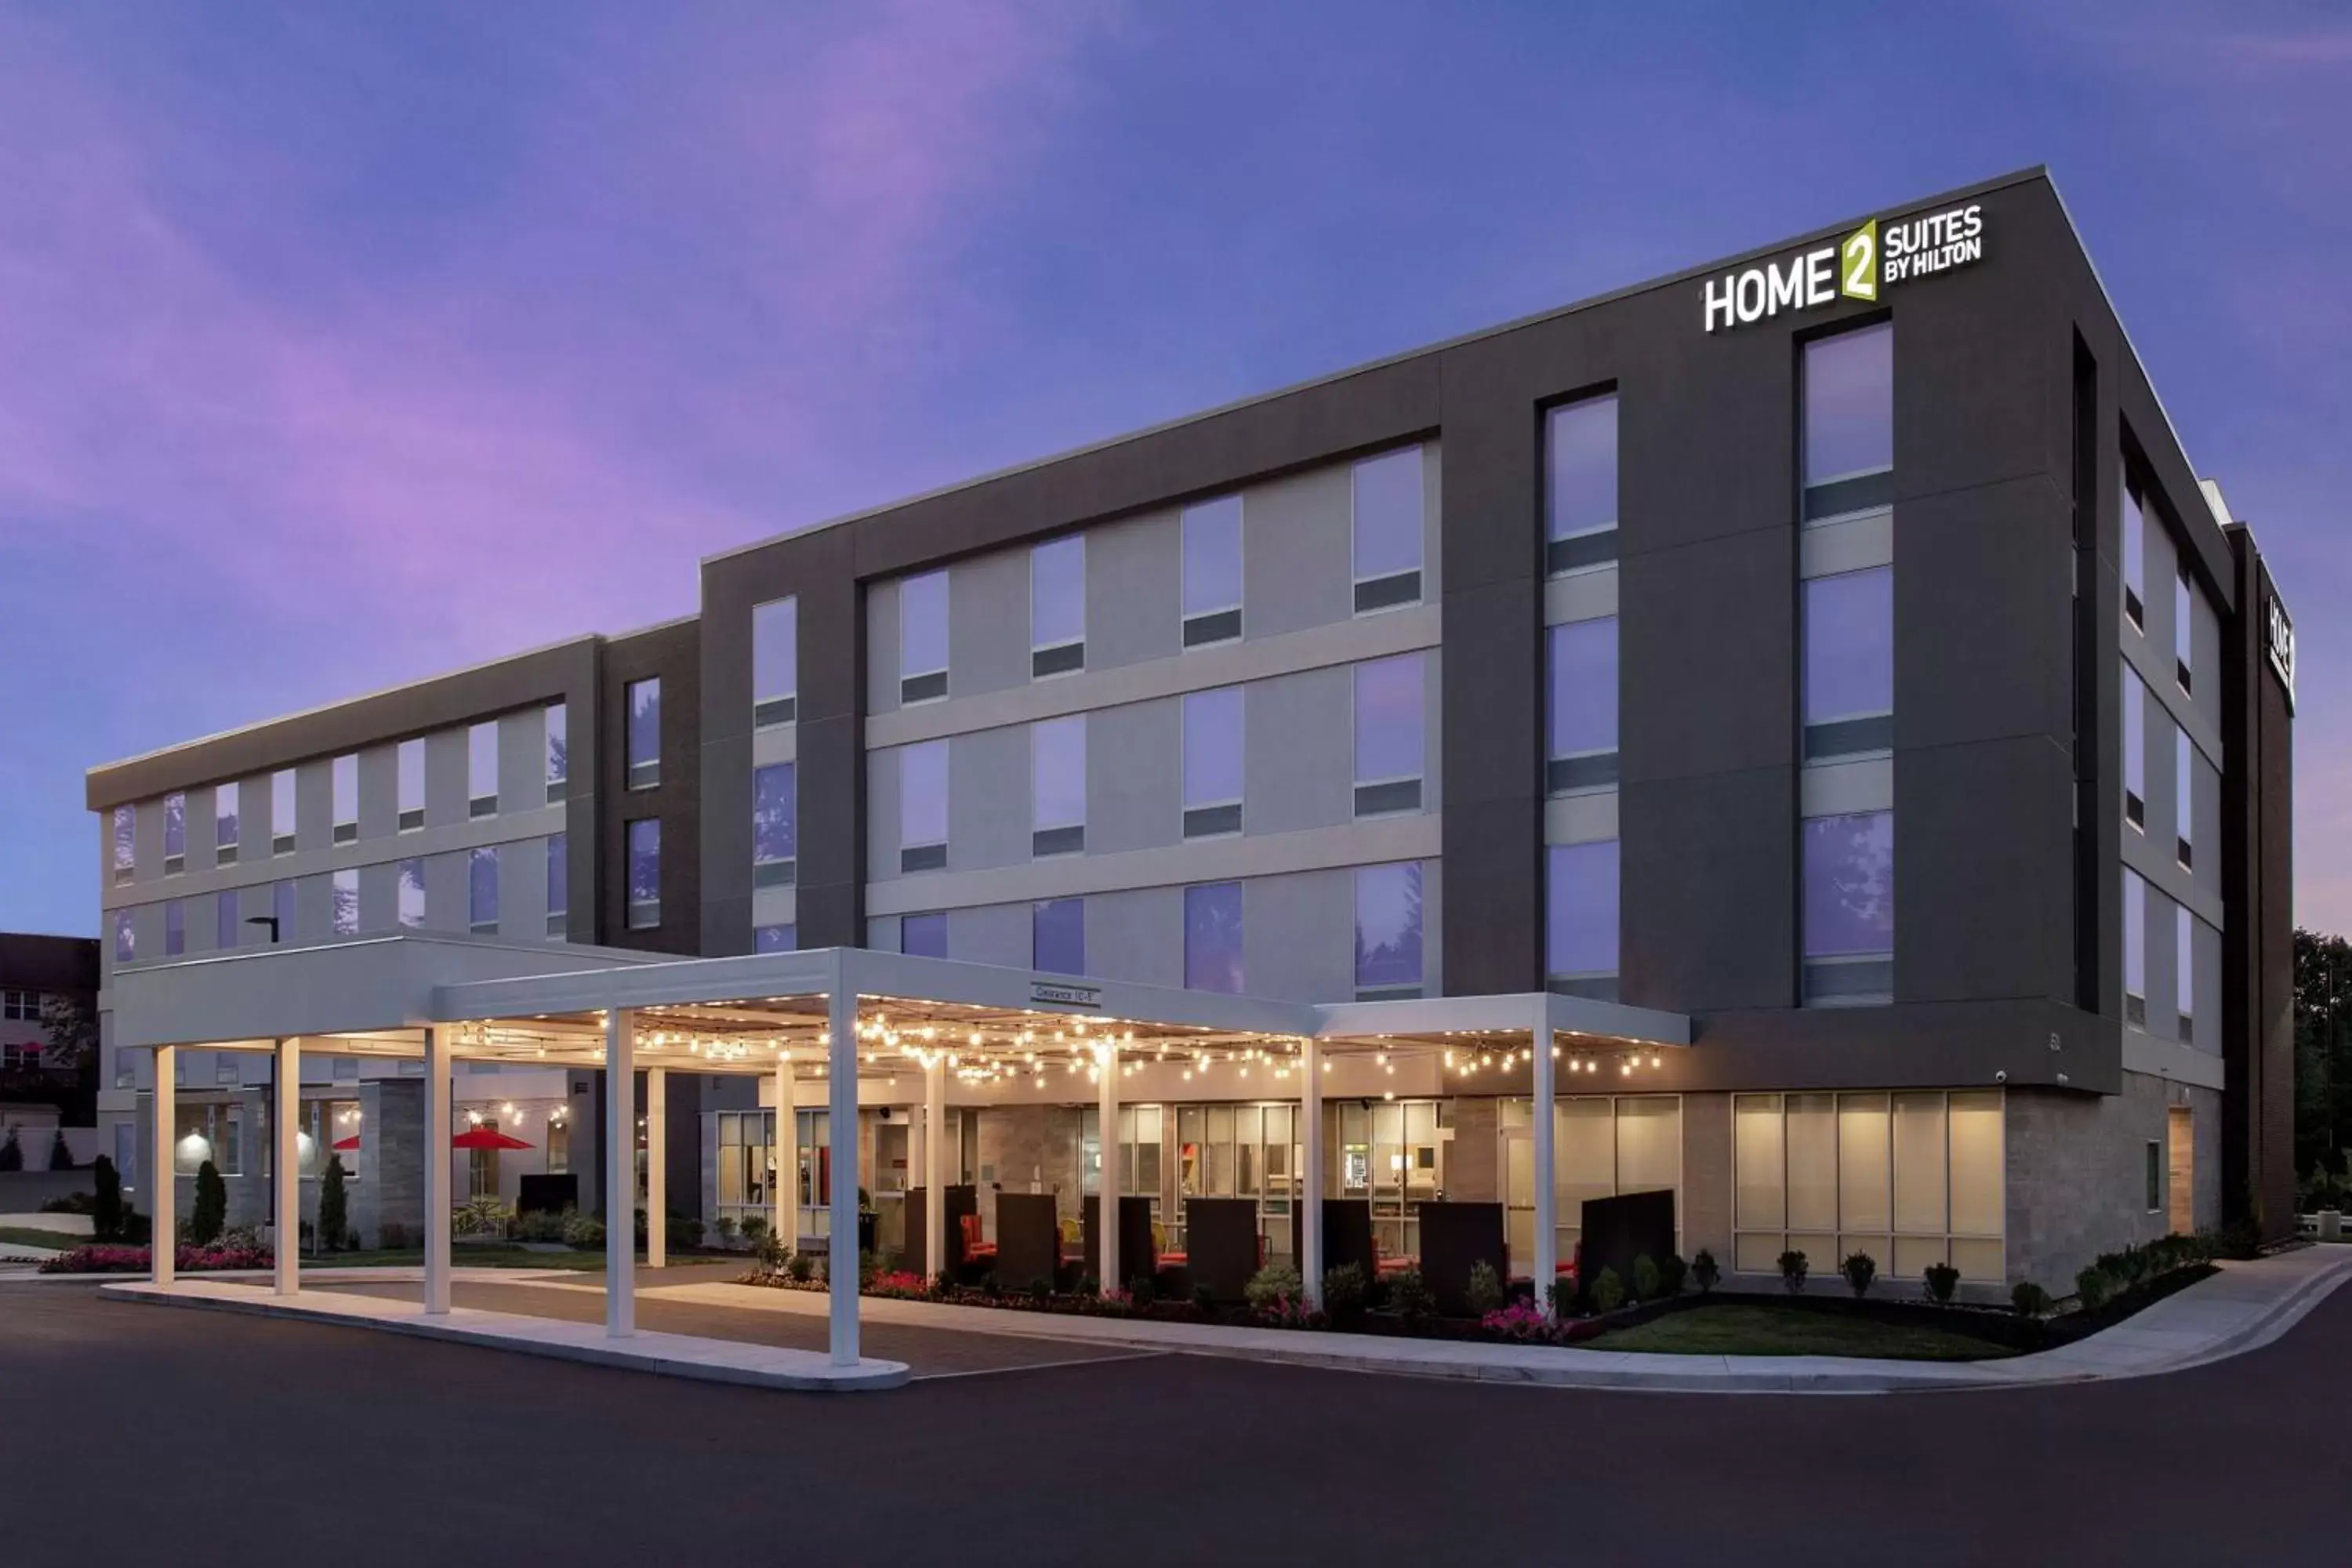 Property Building in Home2 Suites By Hilton Owings Mills, Md